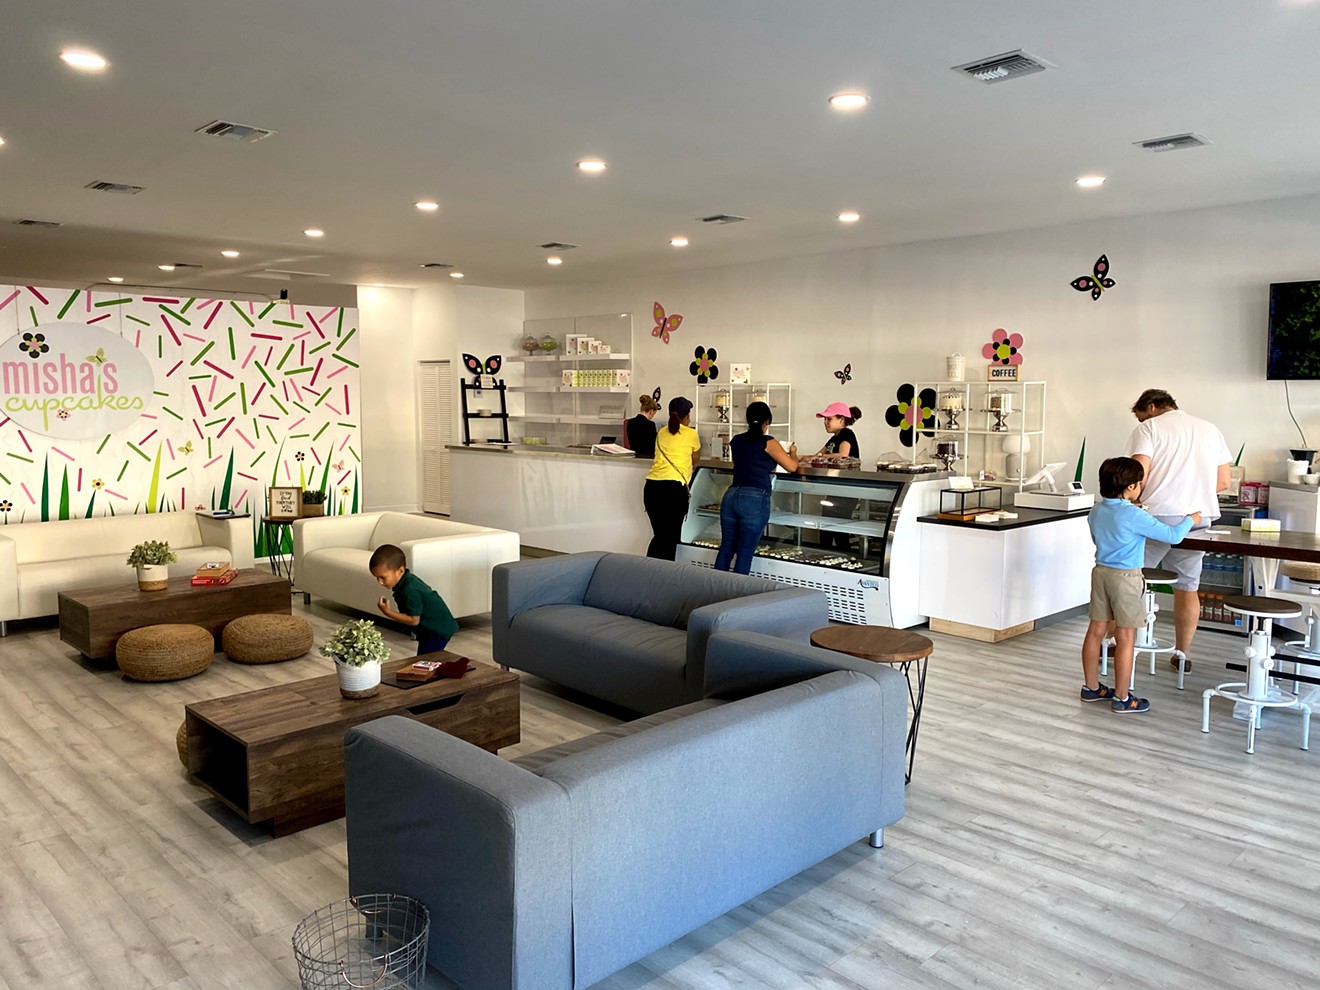 The new flagship on Sunset Drive boasts a "welcoming community environment."